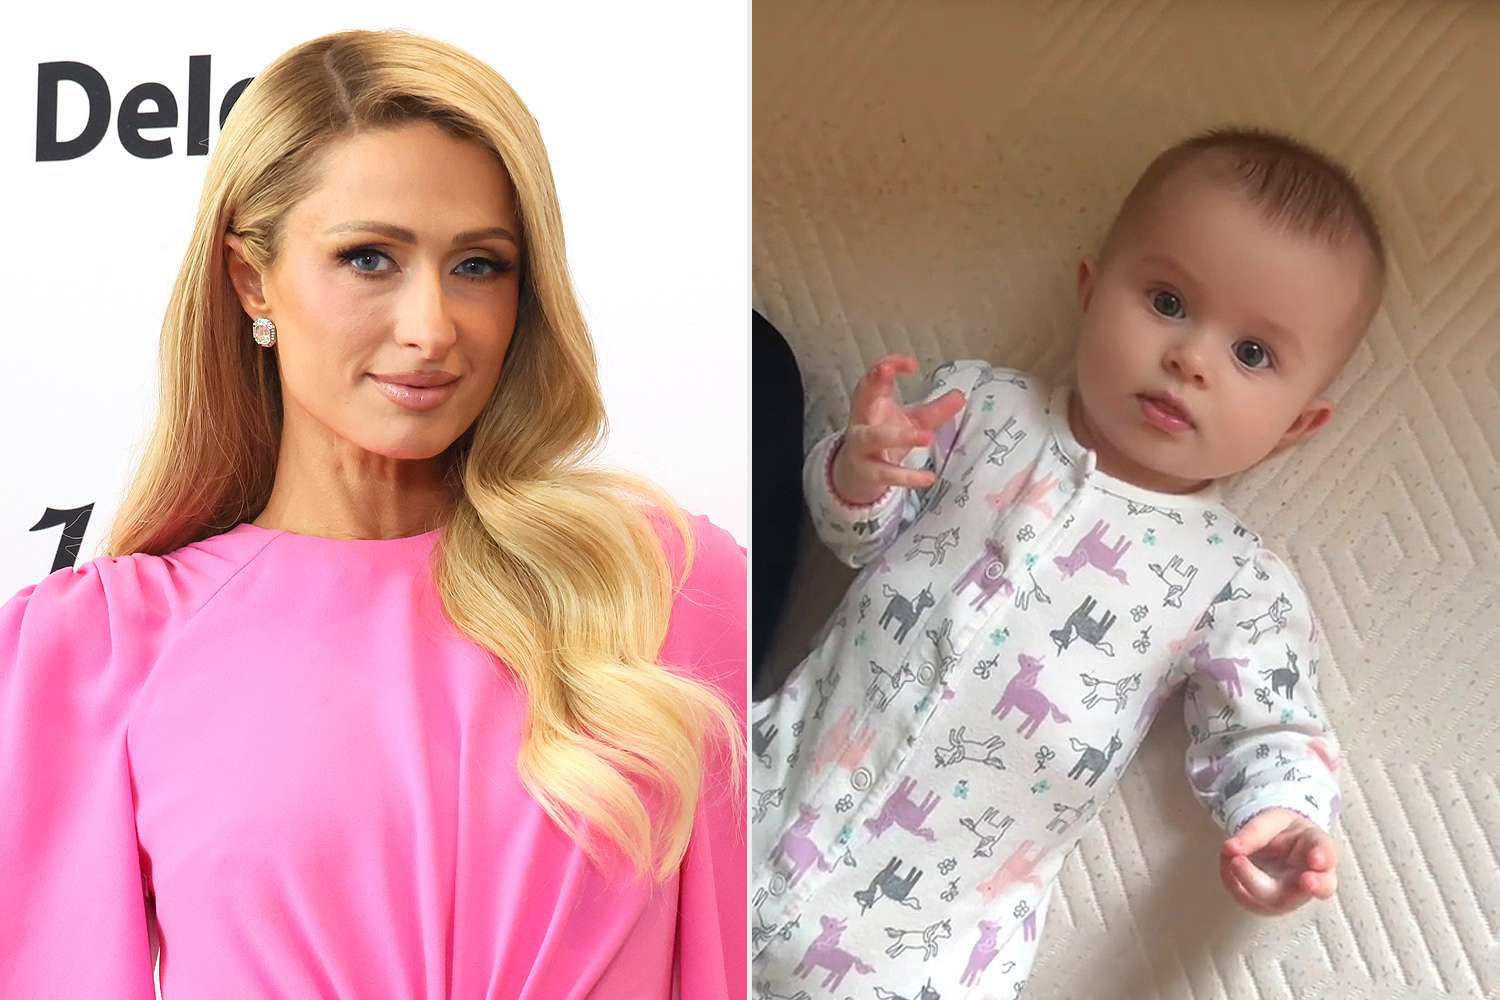 Paris Hilton Shares Adorable New Video of Her 5-Month-Old Daughter London: 'Little Cutie Patootie'